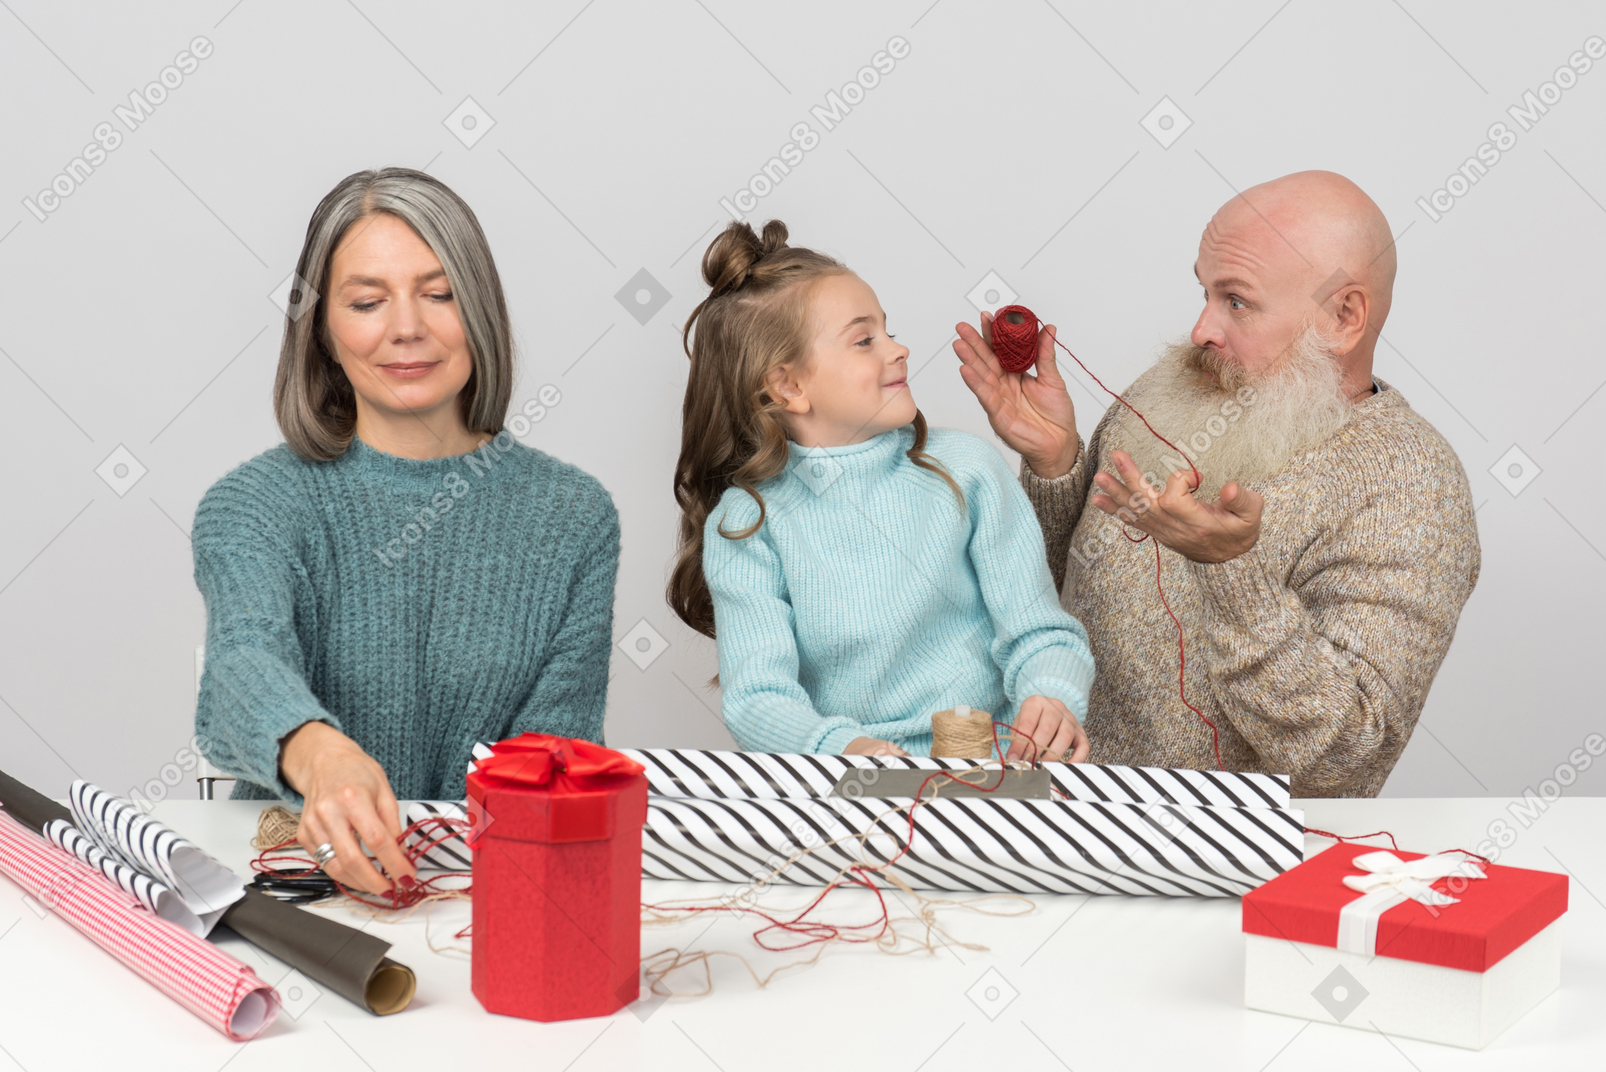 Family time together while preparing for christmas